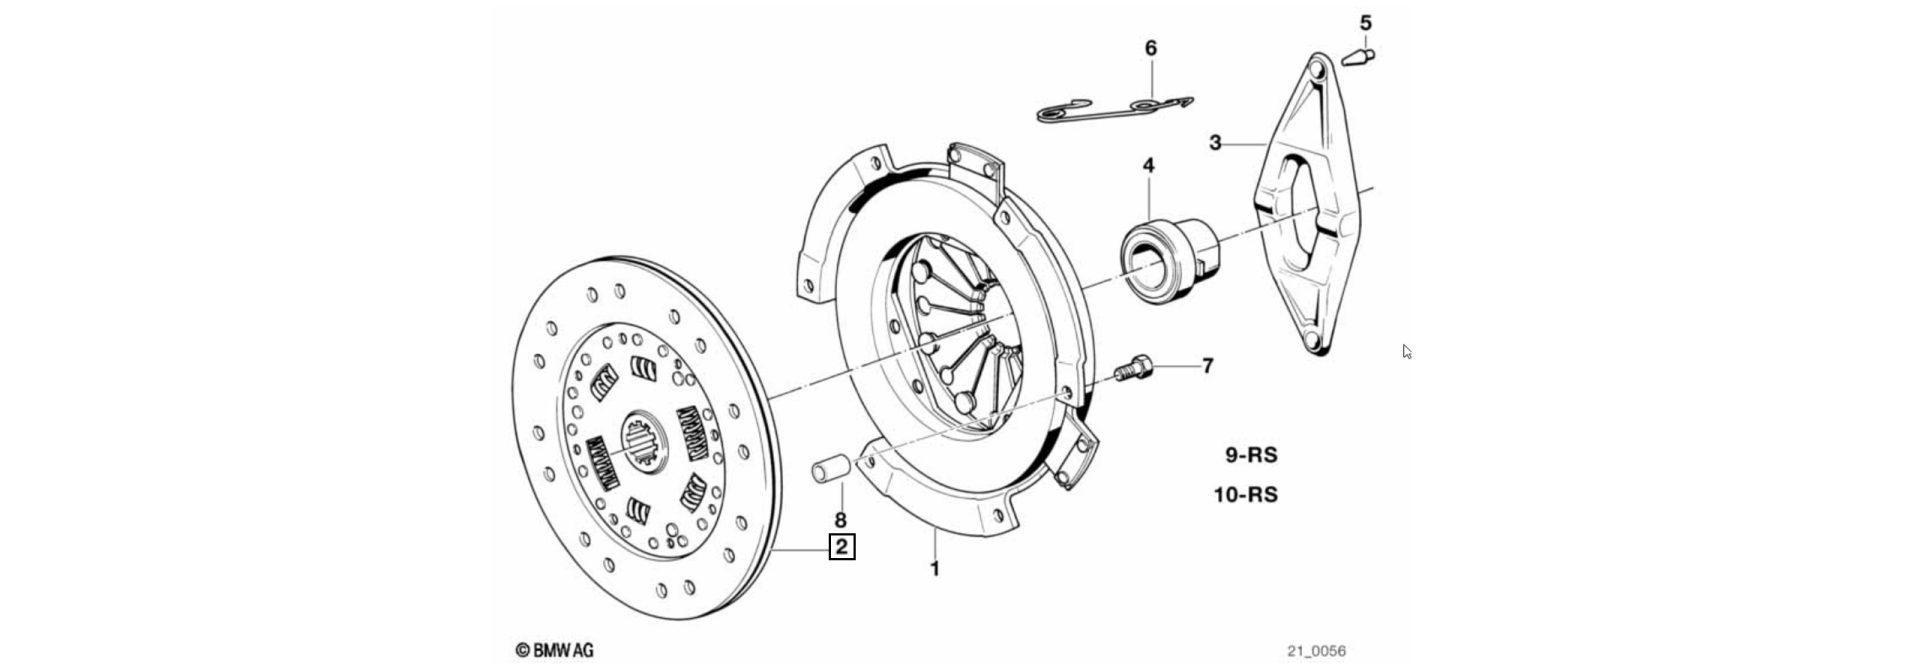 Clutch disk exploded-view drawing